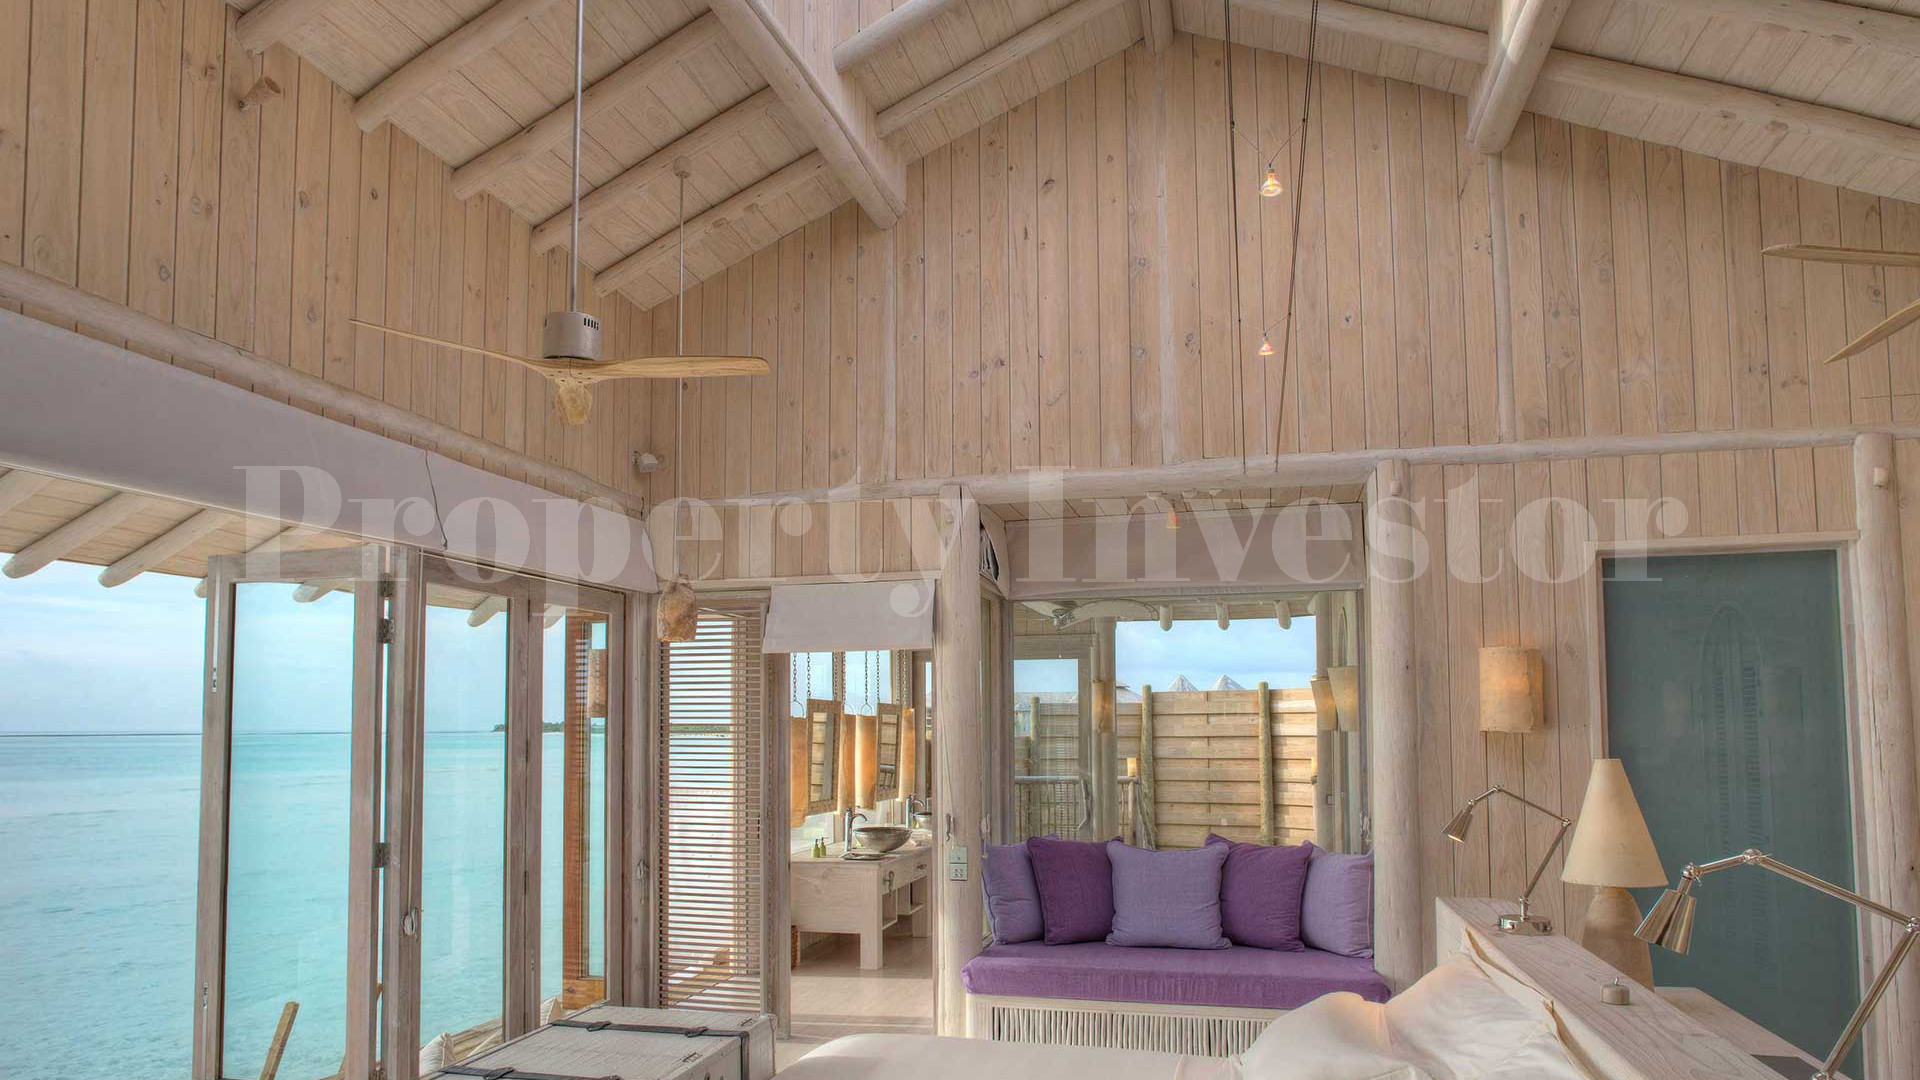 1 Bedroom Overwater Villa with Slide in the Maldives